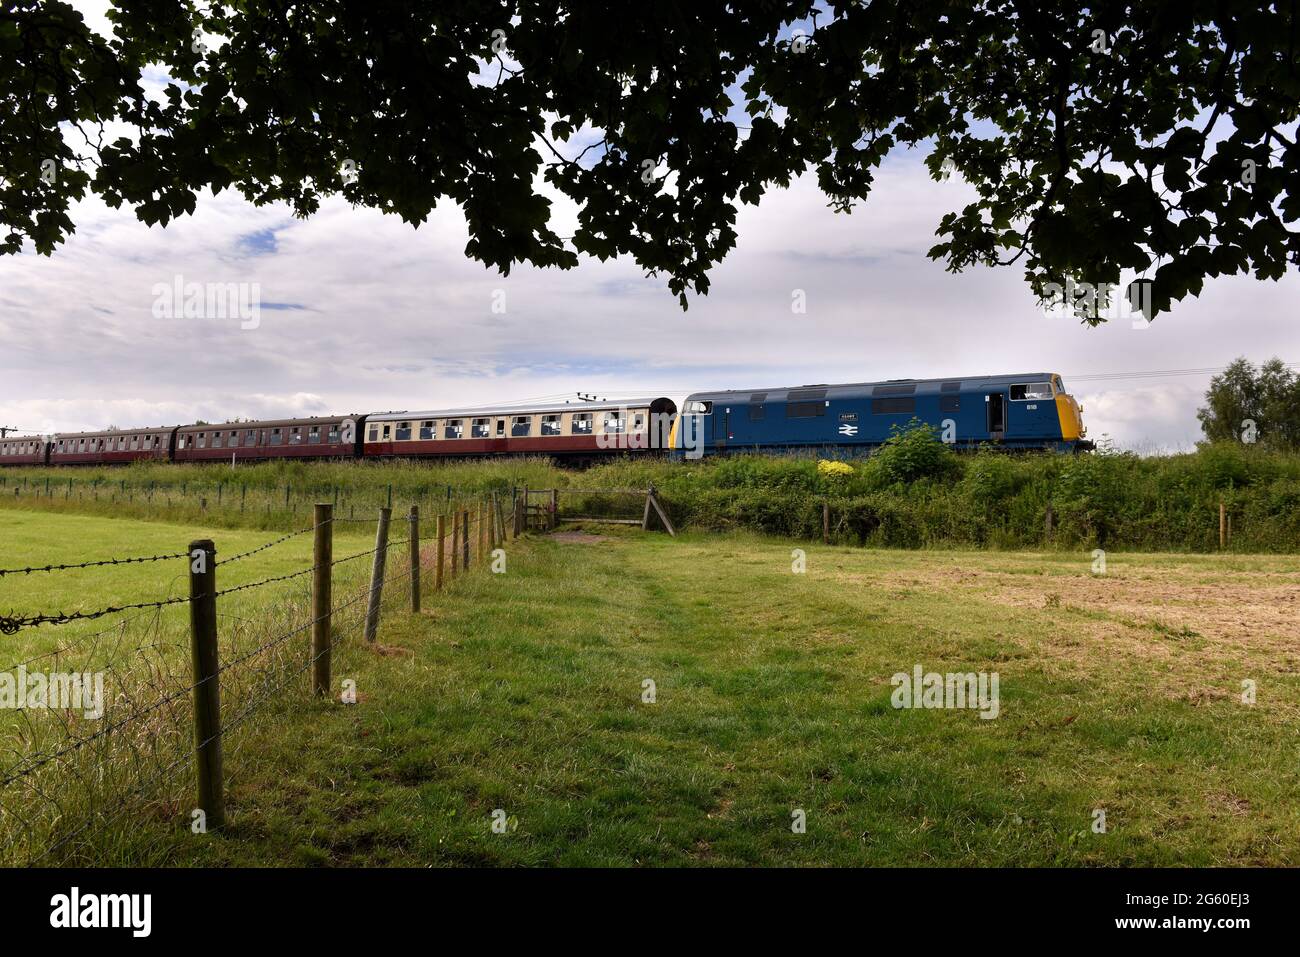 Lancashire, UK, Thursday July 01, 2021. The annual Summer Diesel Spectacular started today under beautiful blue skies on the East Lancashire Railway. The four day event will feature more than a dozen of the railways fleet of diesel engine and is expected to attract hundreds of visitors over the weekend. Diesel engines haul passengers from the Burrs Country Park stop in Bury on route to Rawtenstall. Credit: Paul Heyes/ Alamy Live News Stock Photo